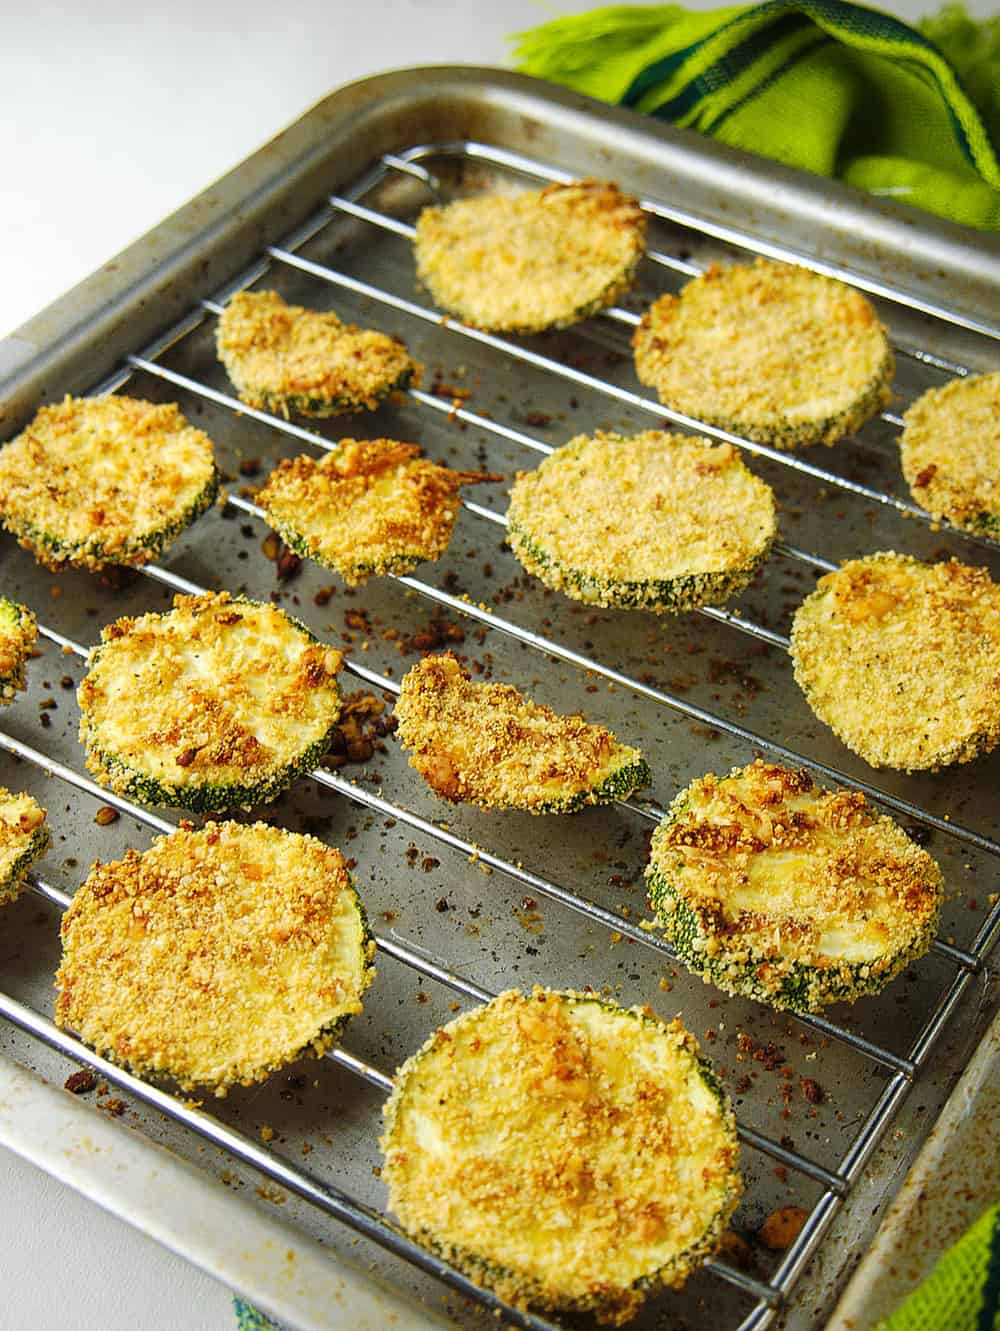 baked and crispy courgette chips with parmesan, fresh out of the oven on a tray